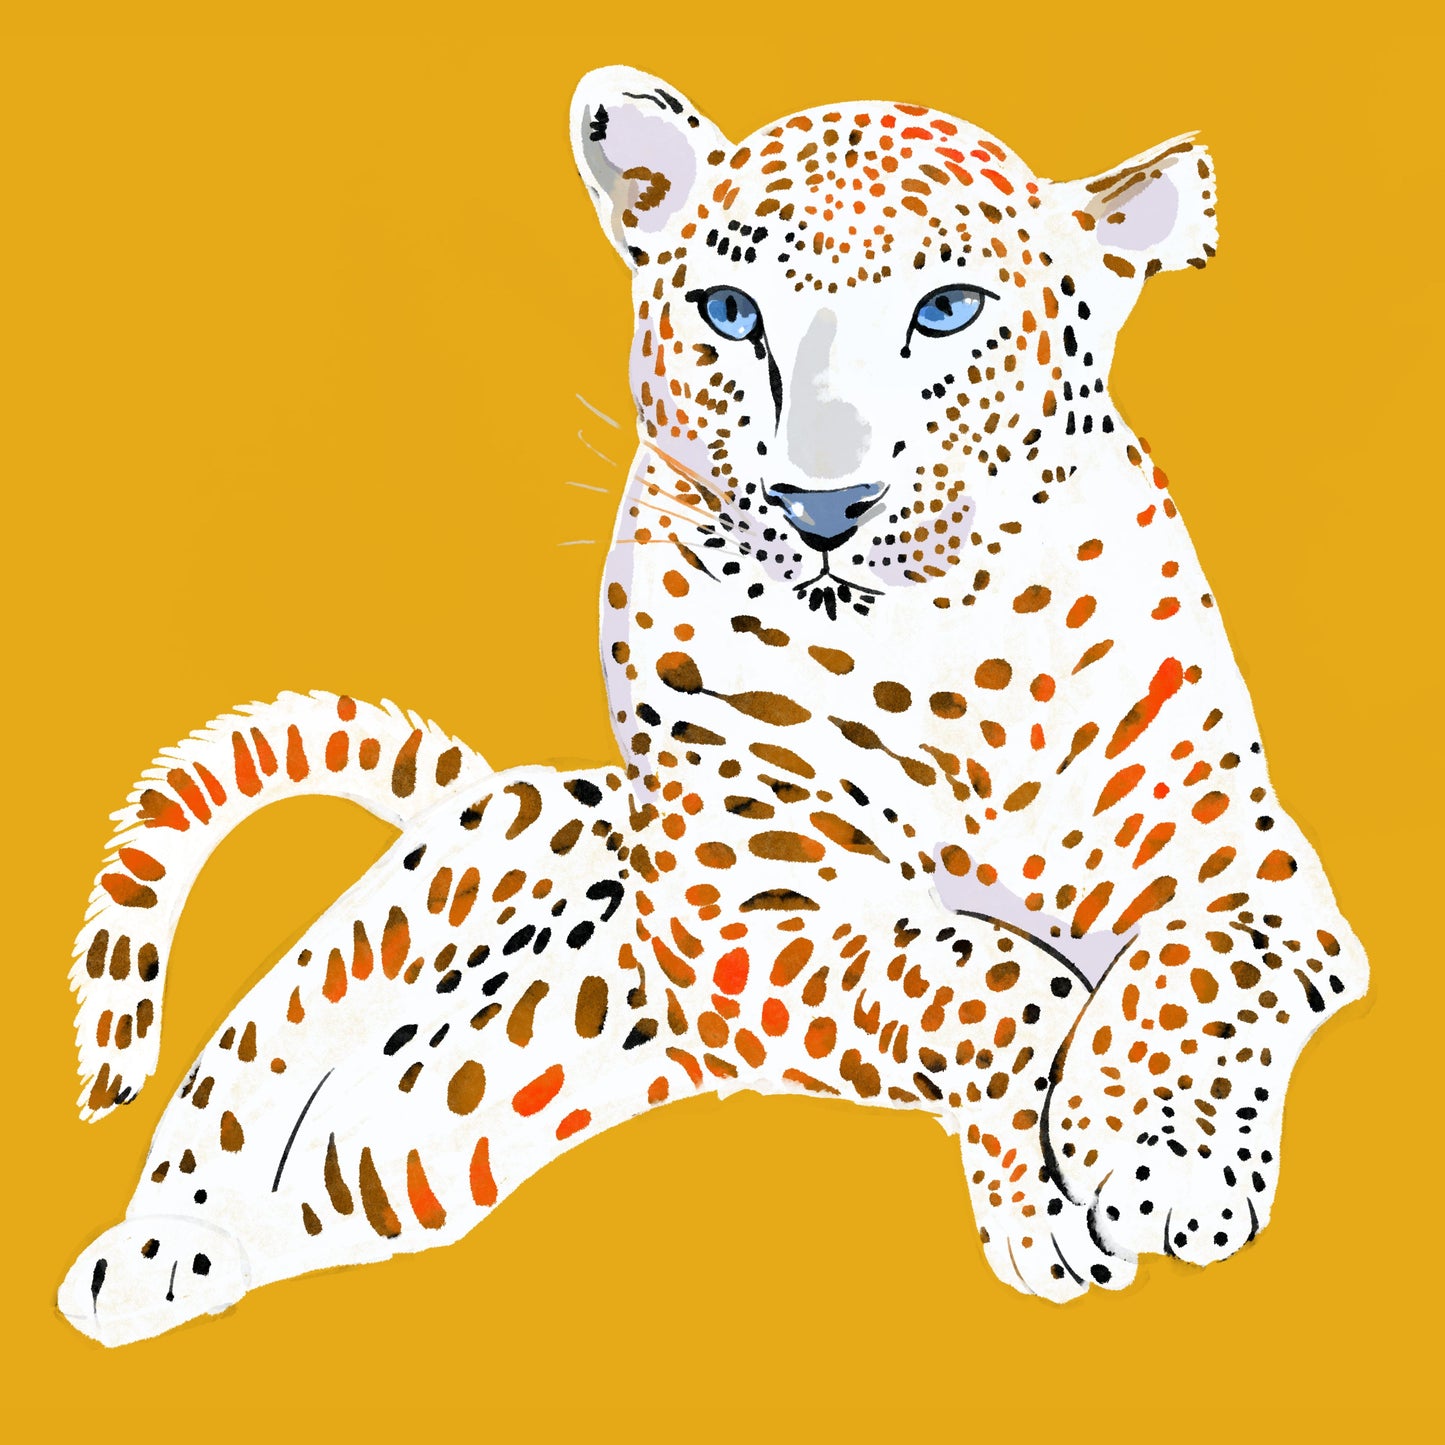 Snow Leopard Chillin - Illustrated Print by Thomas Little